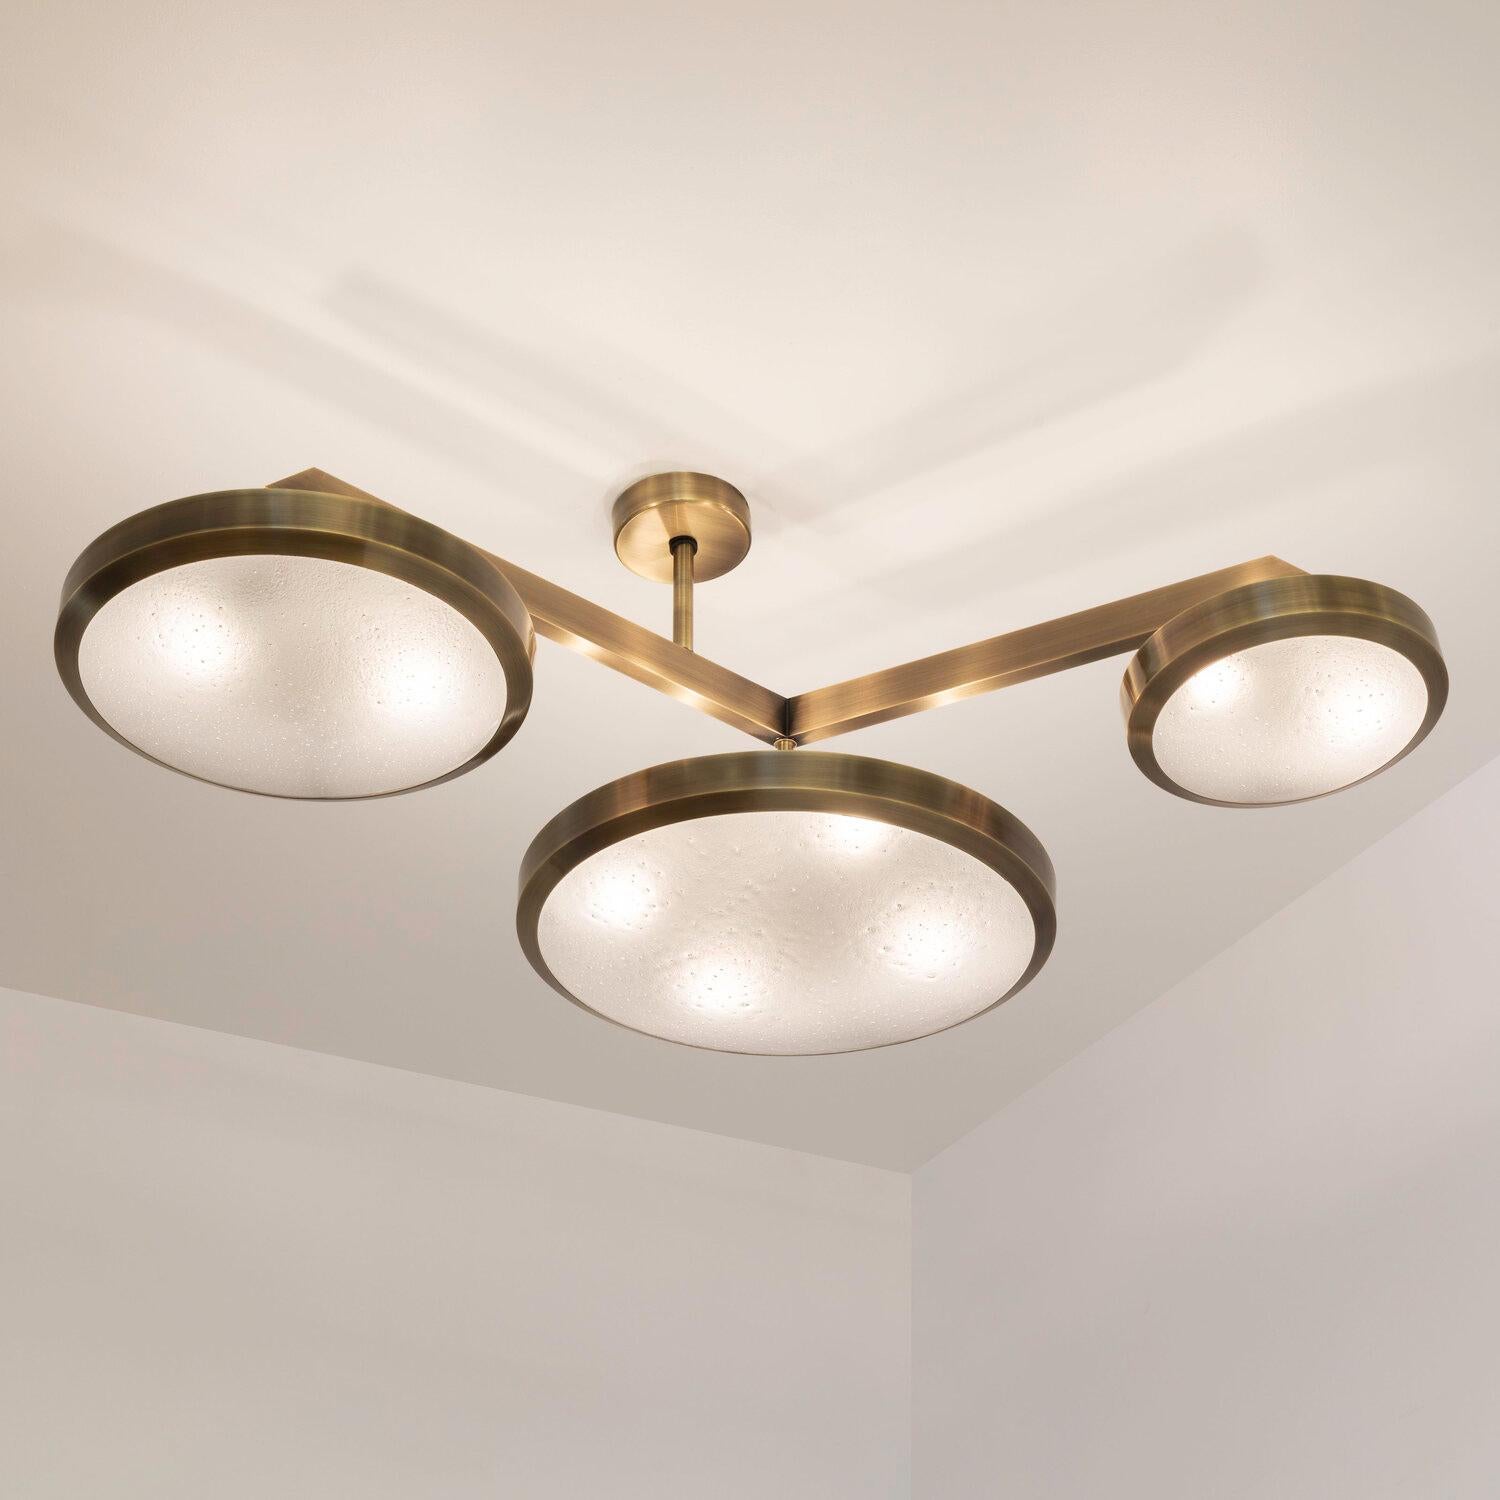 The Zeta ceiling light features a composition of variable sized Murano glass shades methodically balanced on a “V” shaped brass frame. The first images show the fixture in our bronzo ottone (bronze) finish-subsequent pictures show it in a selection